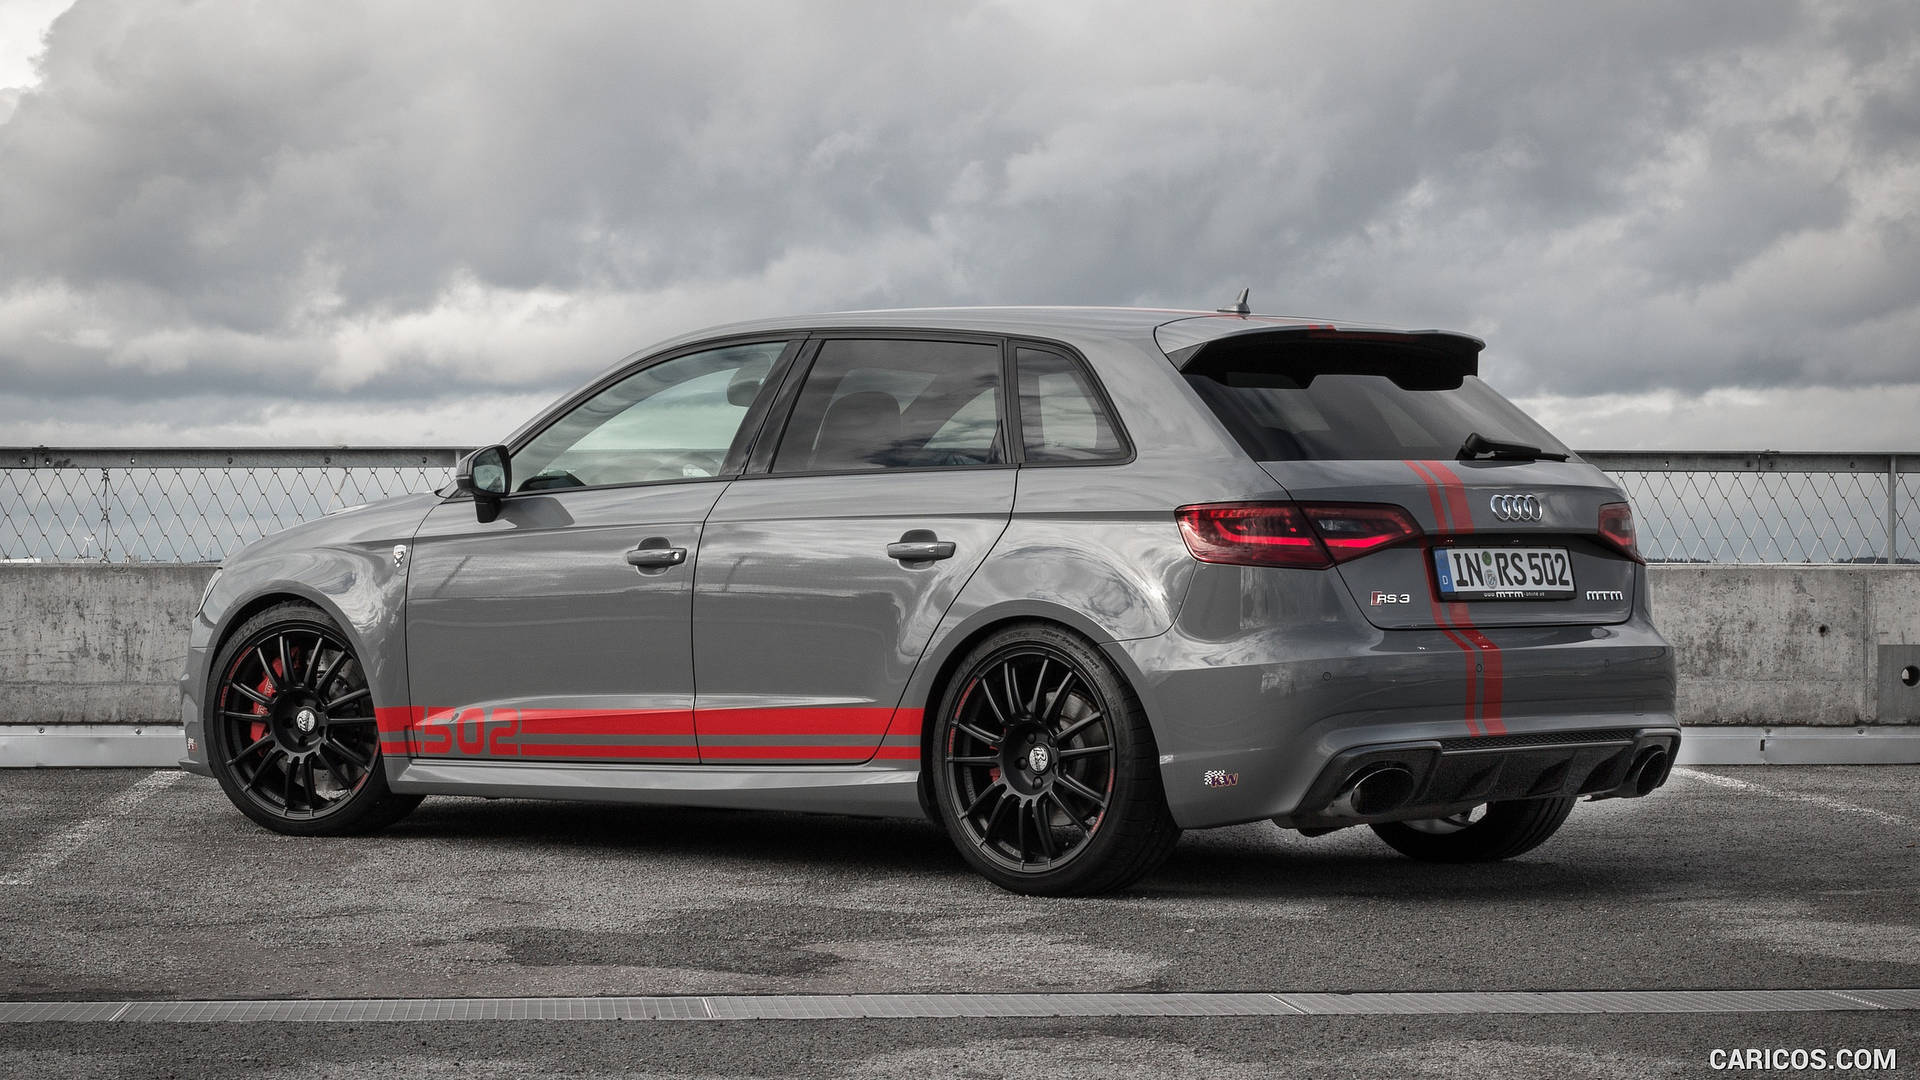 Powerful Sophistication - Grey Audi Rs With Red Accents